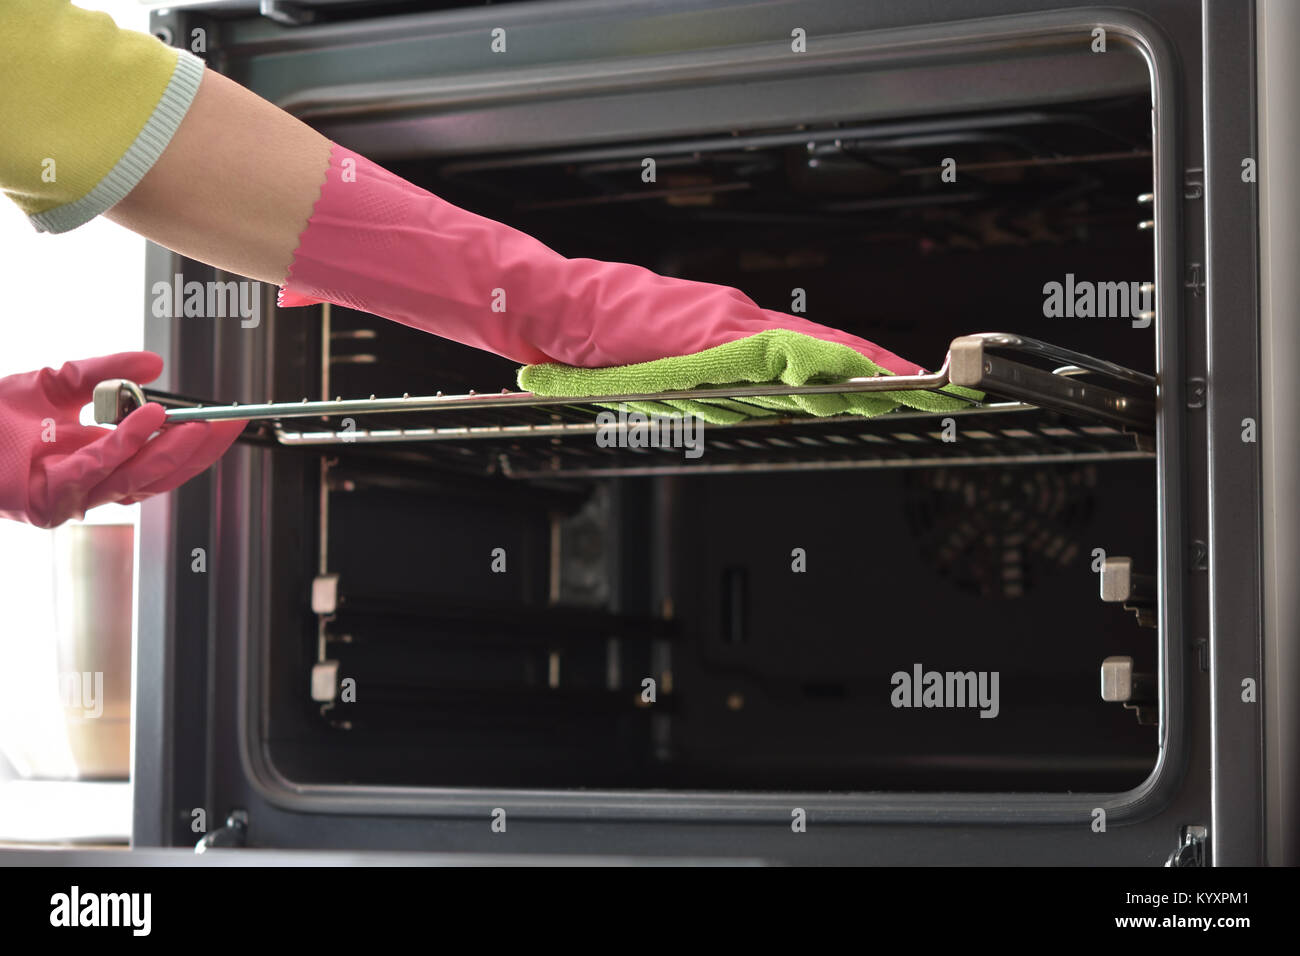 Cleaning the oven. Woman's hand in household cleaning gloves cleans oven inside. Clean oven in kitchen. Stock Photo